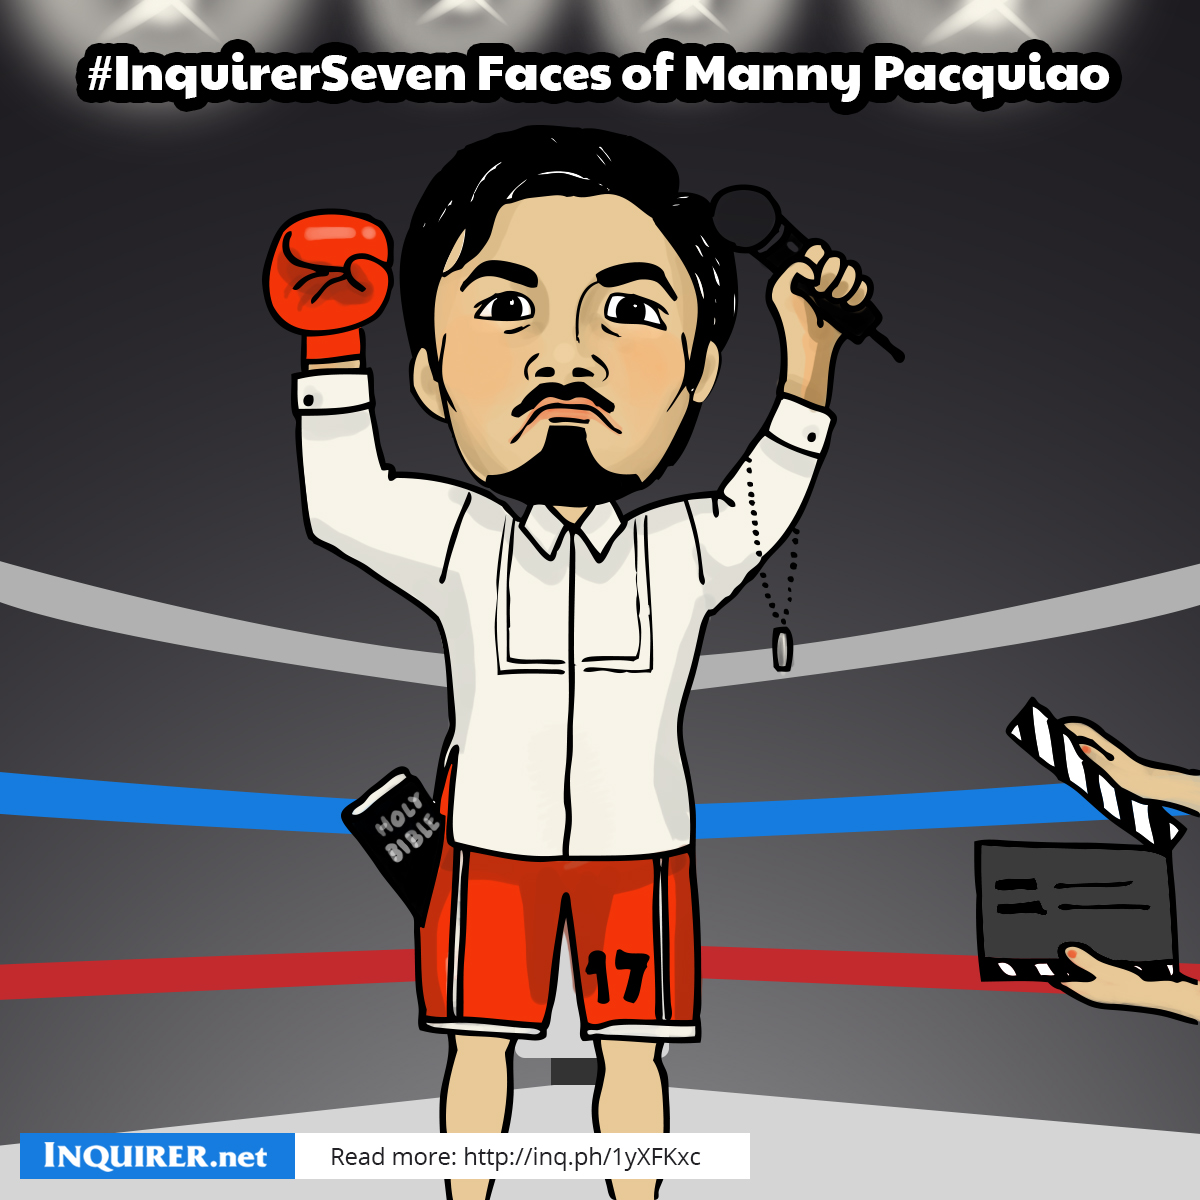 #InquirerSeven faces of Manny Pacquiao outside the boxing ring